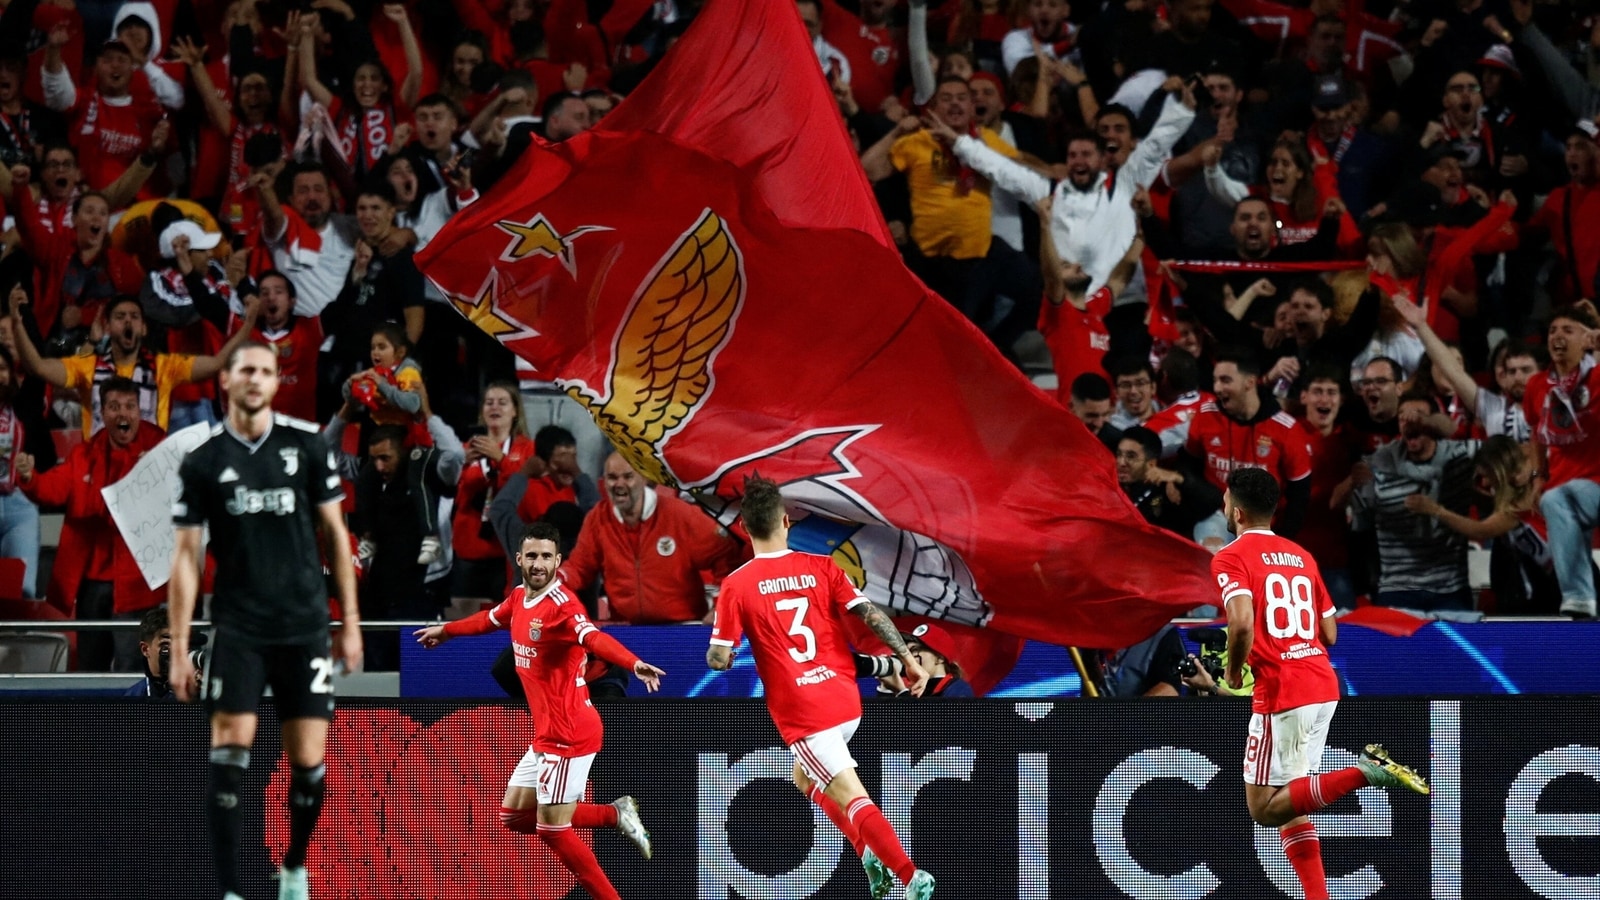 benfica-end-juve-s-champions-league-hopes-in-seven-goal-thriller